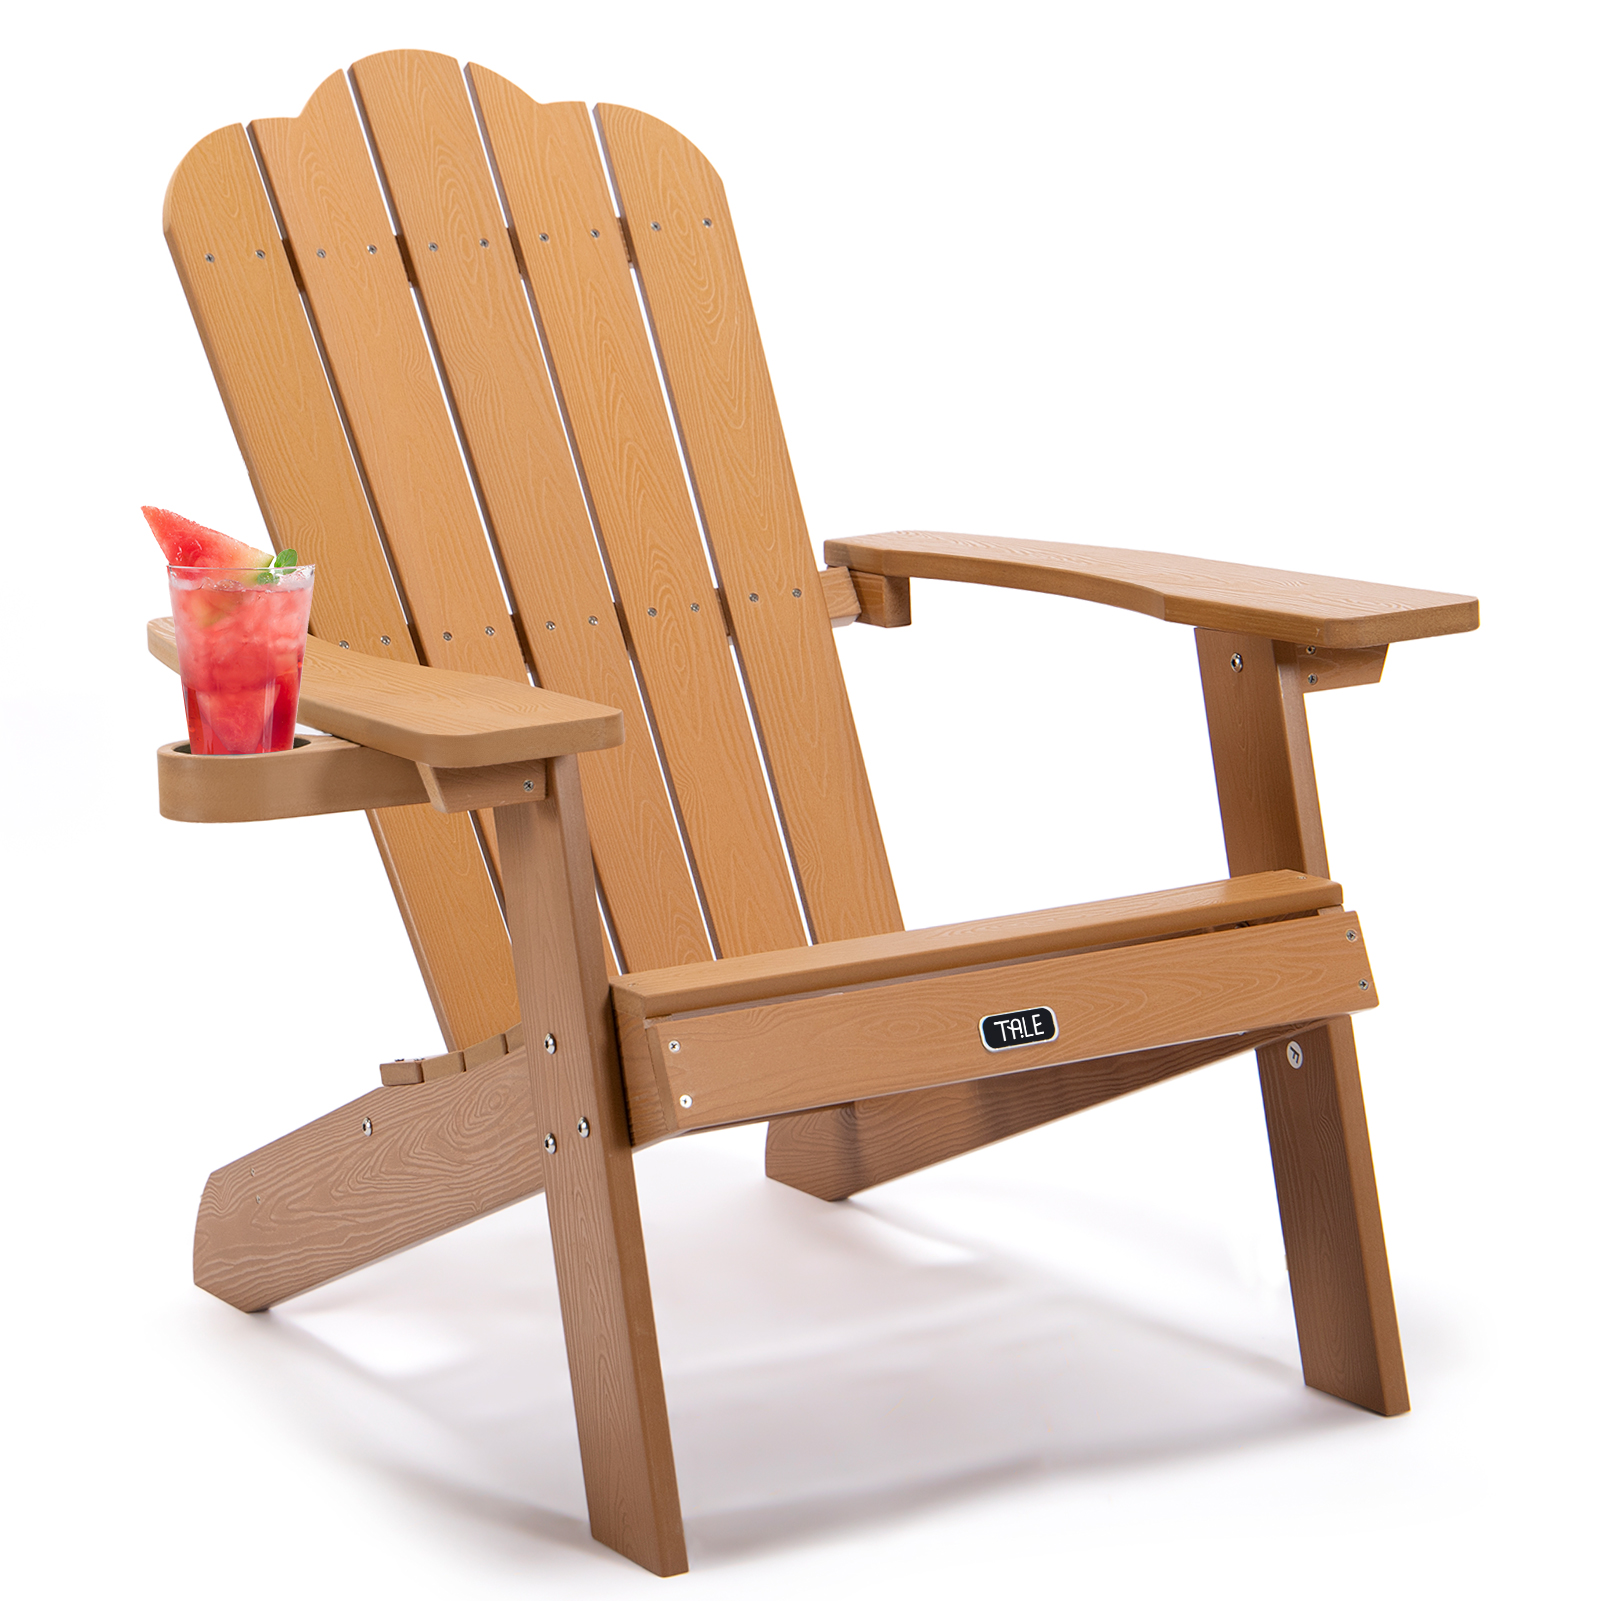 Folding Adirondack Chair, Plastic Wooden Lounge Chairs for Yard, Garden, Patio - image 1 of 7